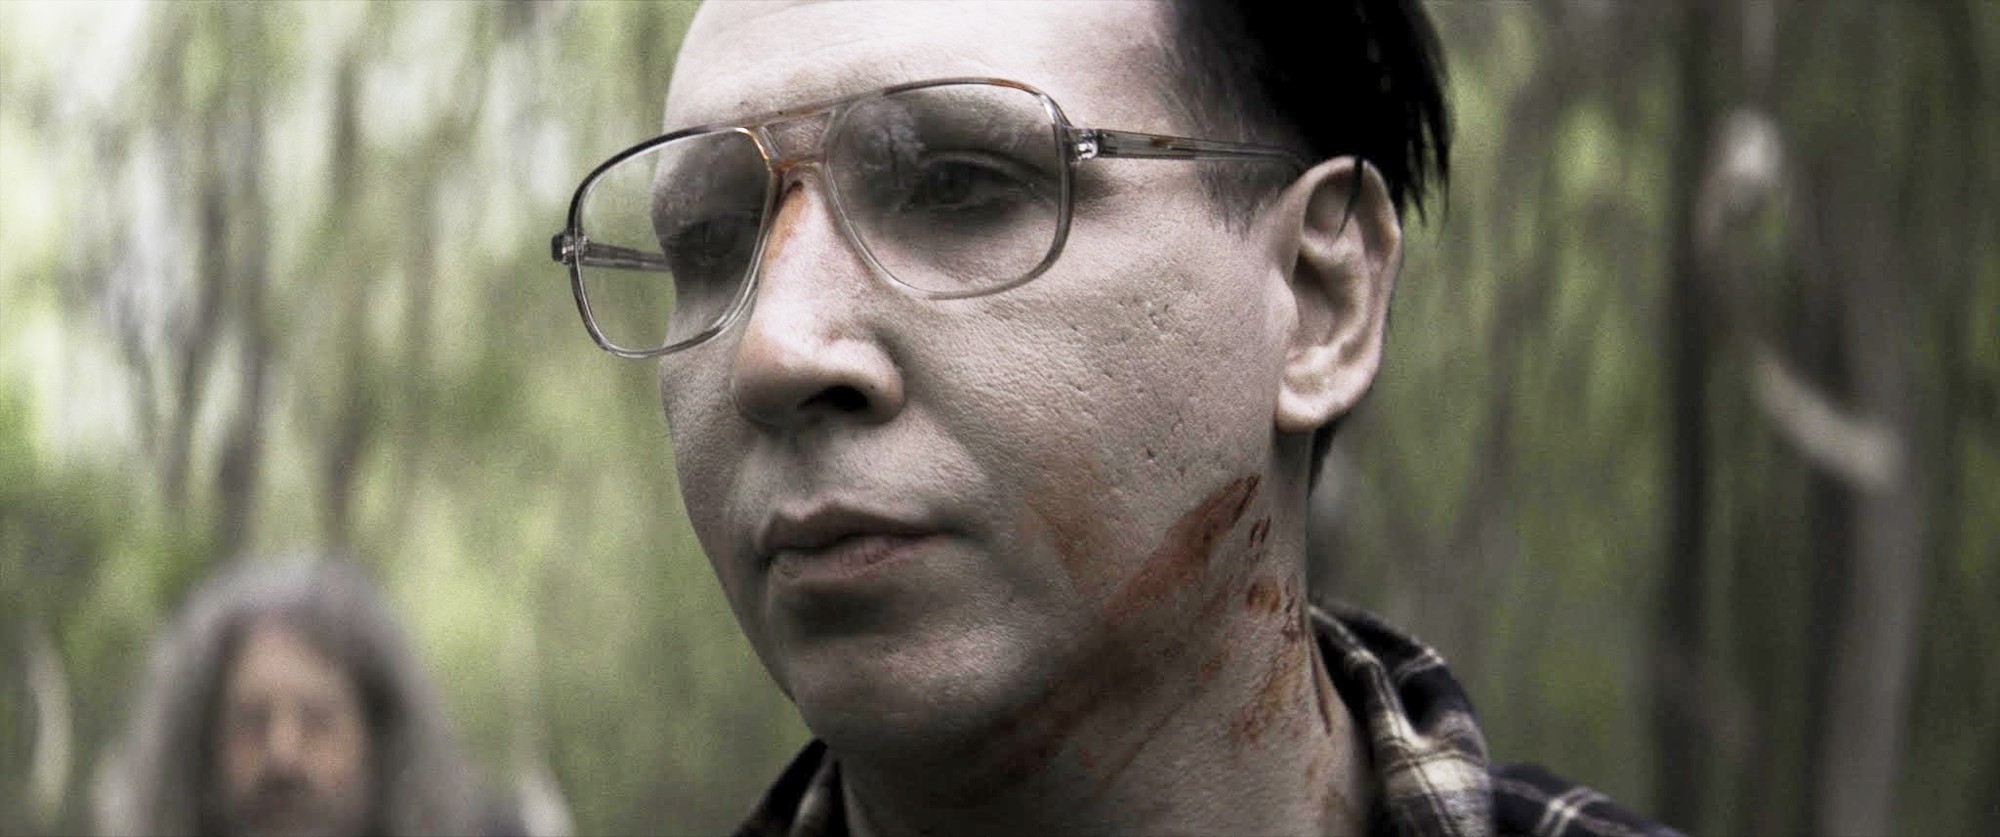 Marilyn Manson stars as Pope in FilmRise's Let Me Make You a Martyr (2017)